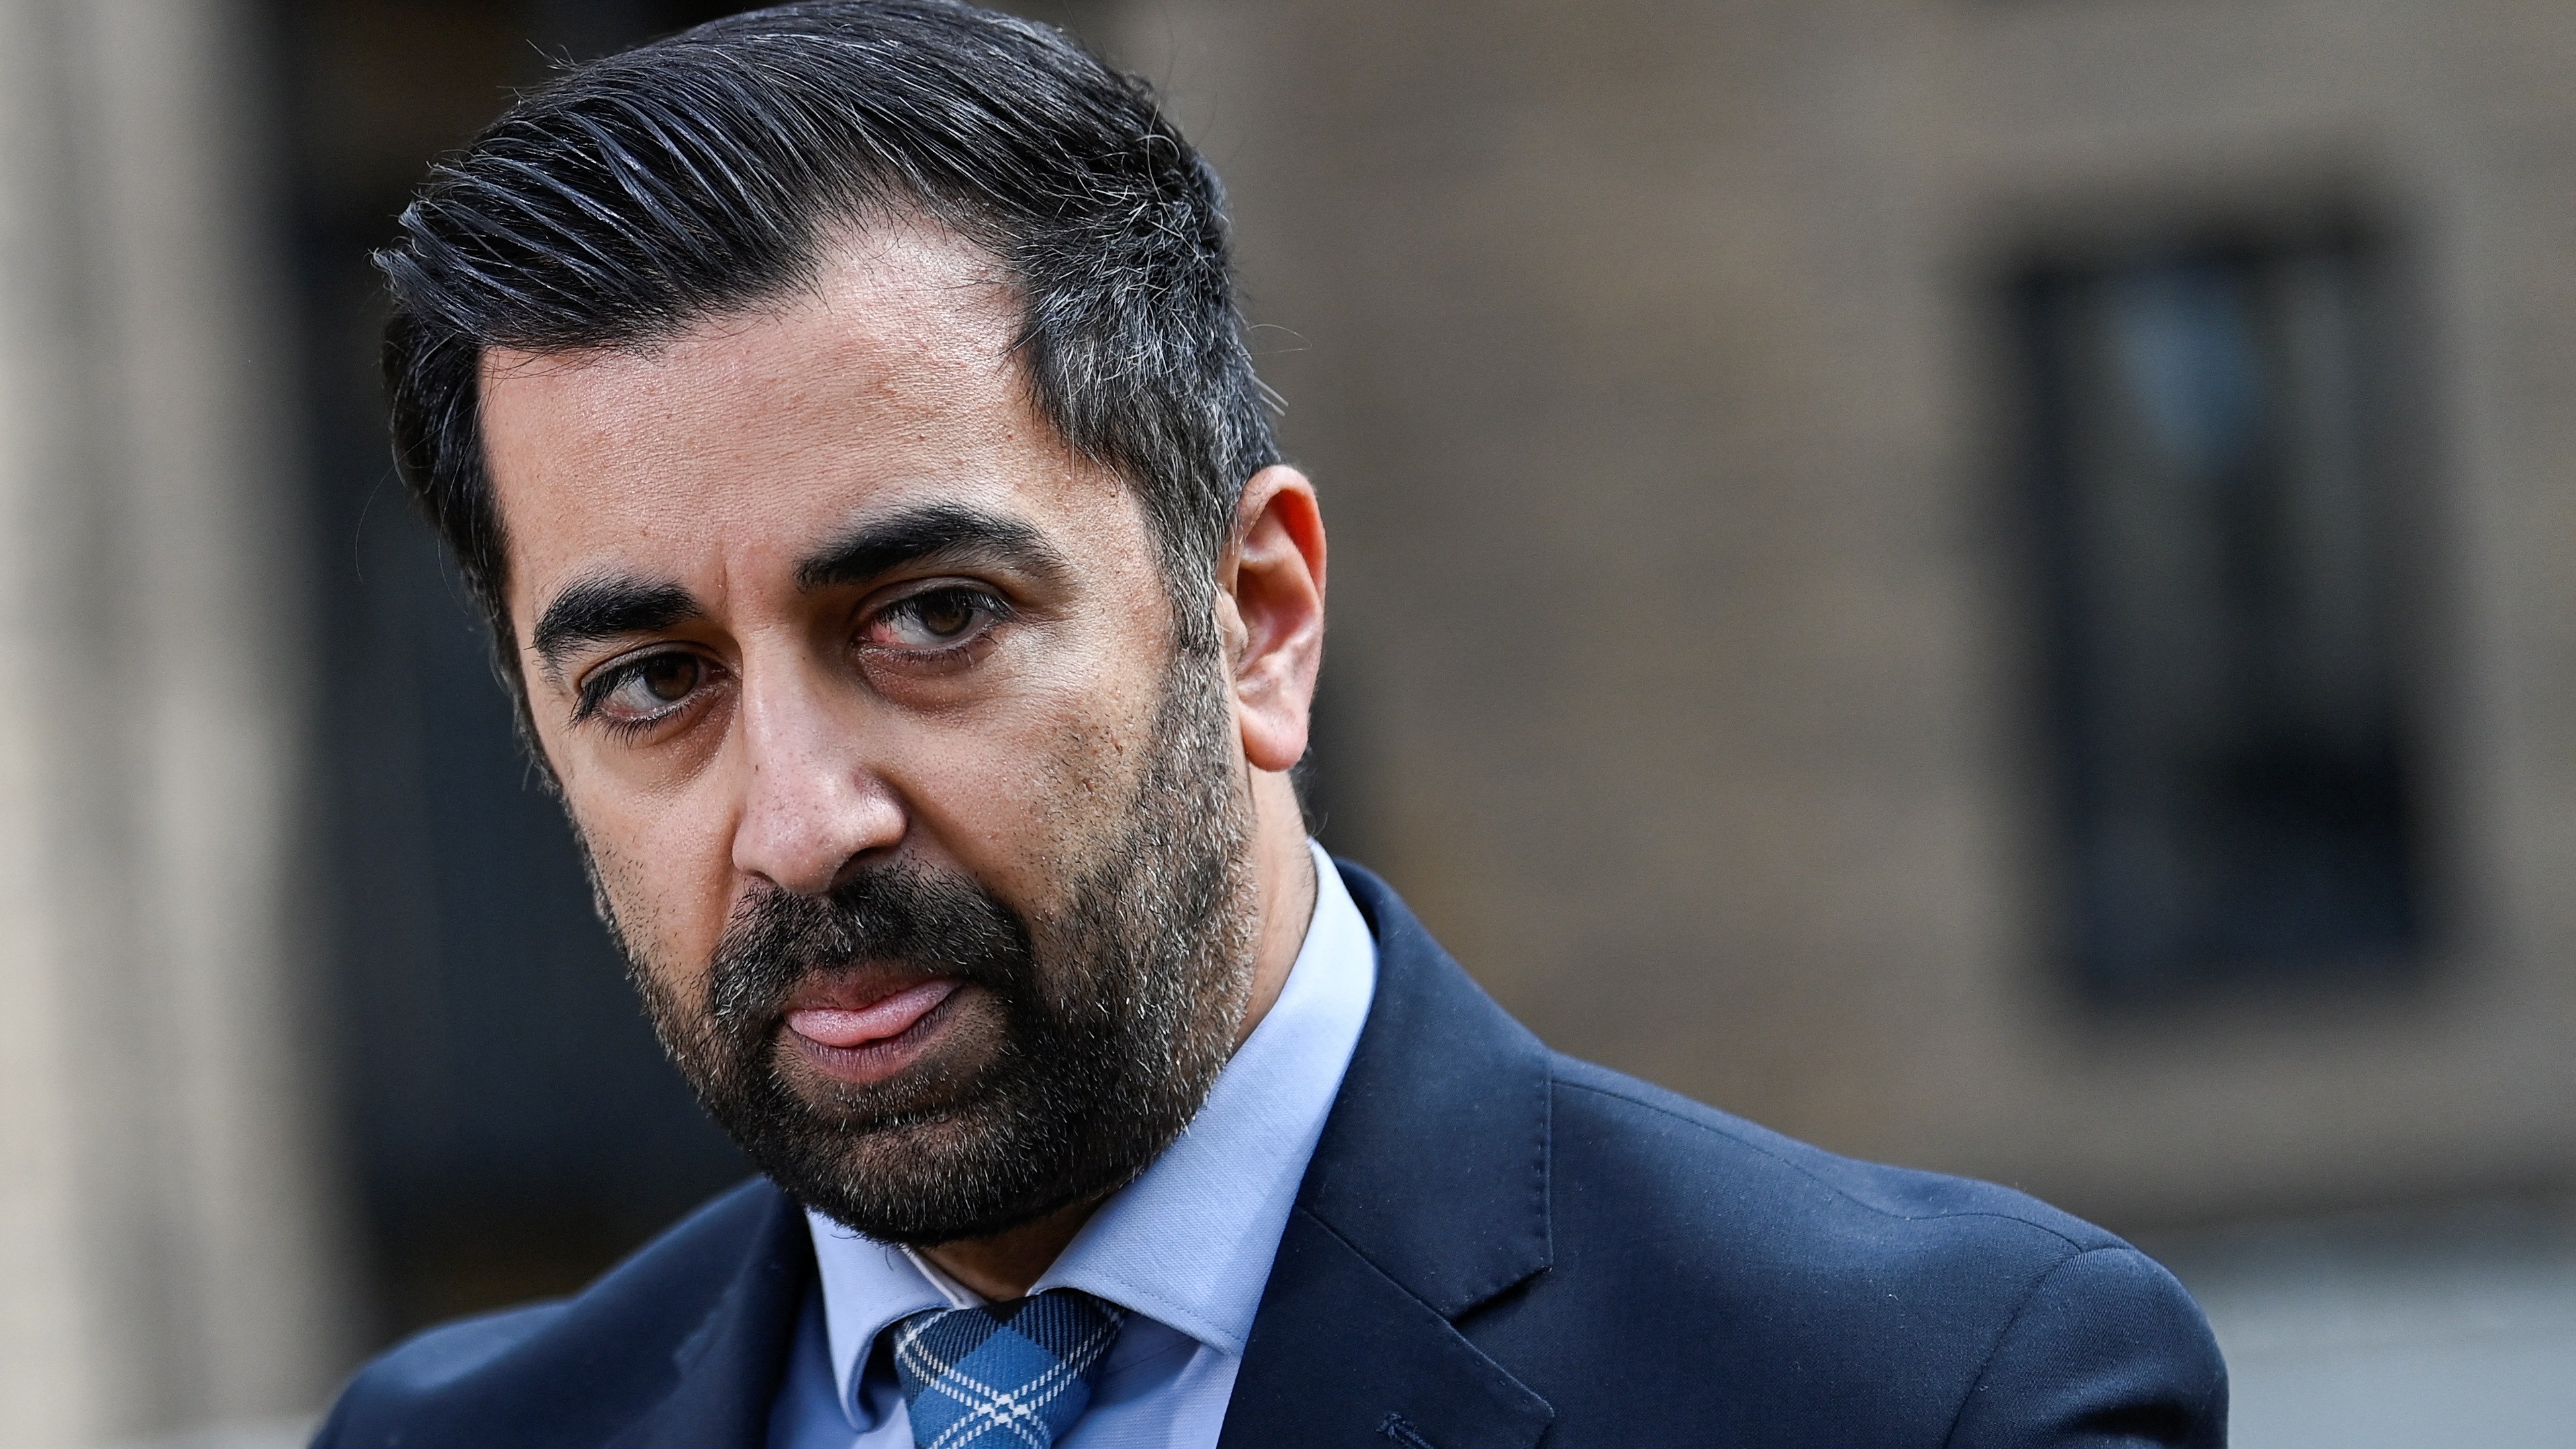 On a visit to Dundee on Friday Humza Yousaf showed the strain after a week in which his political career appeared to be unravelling